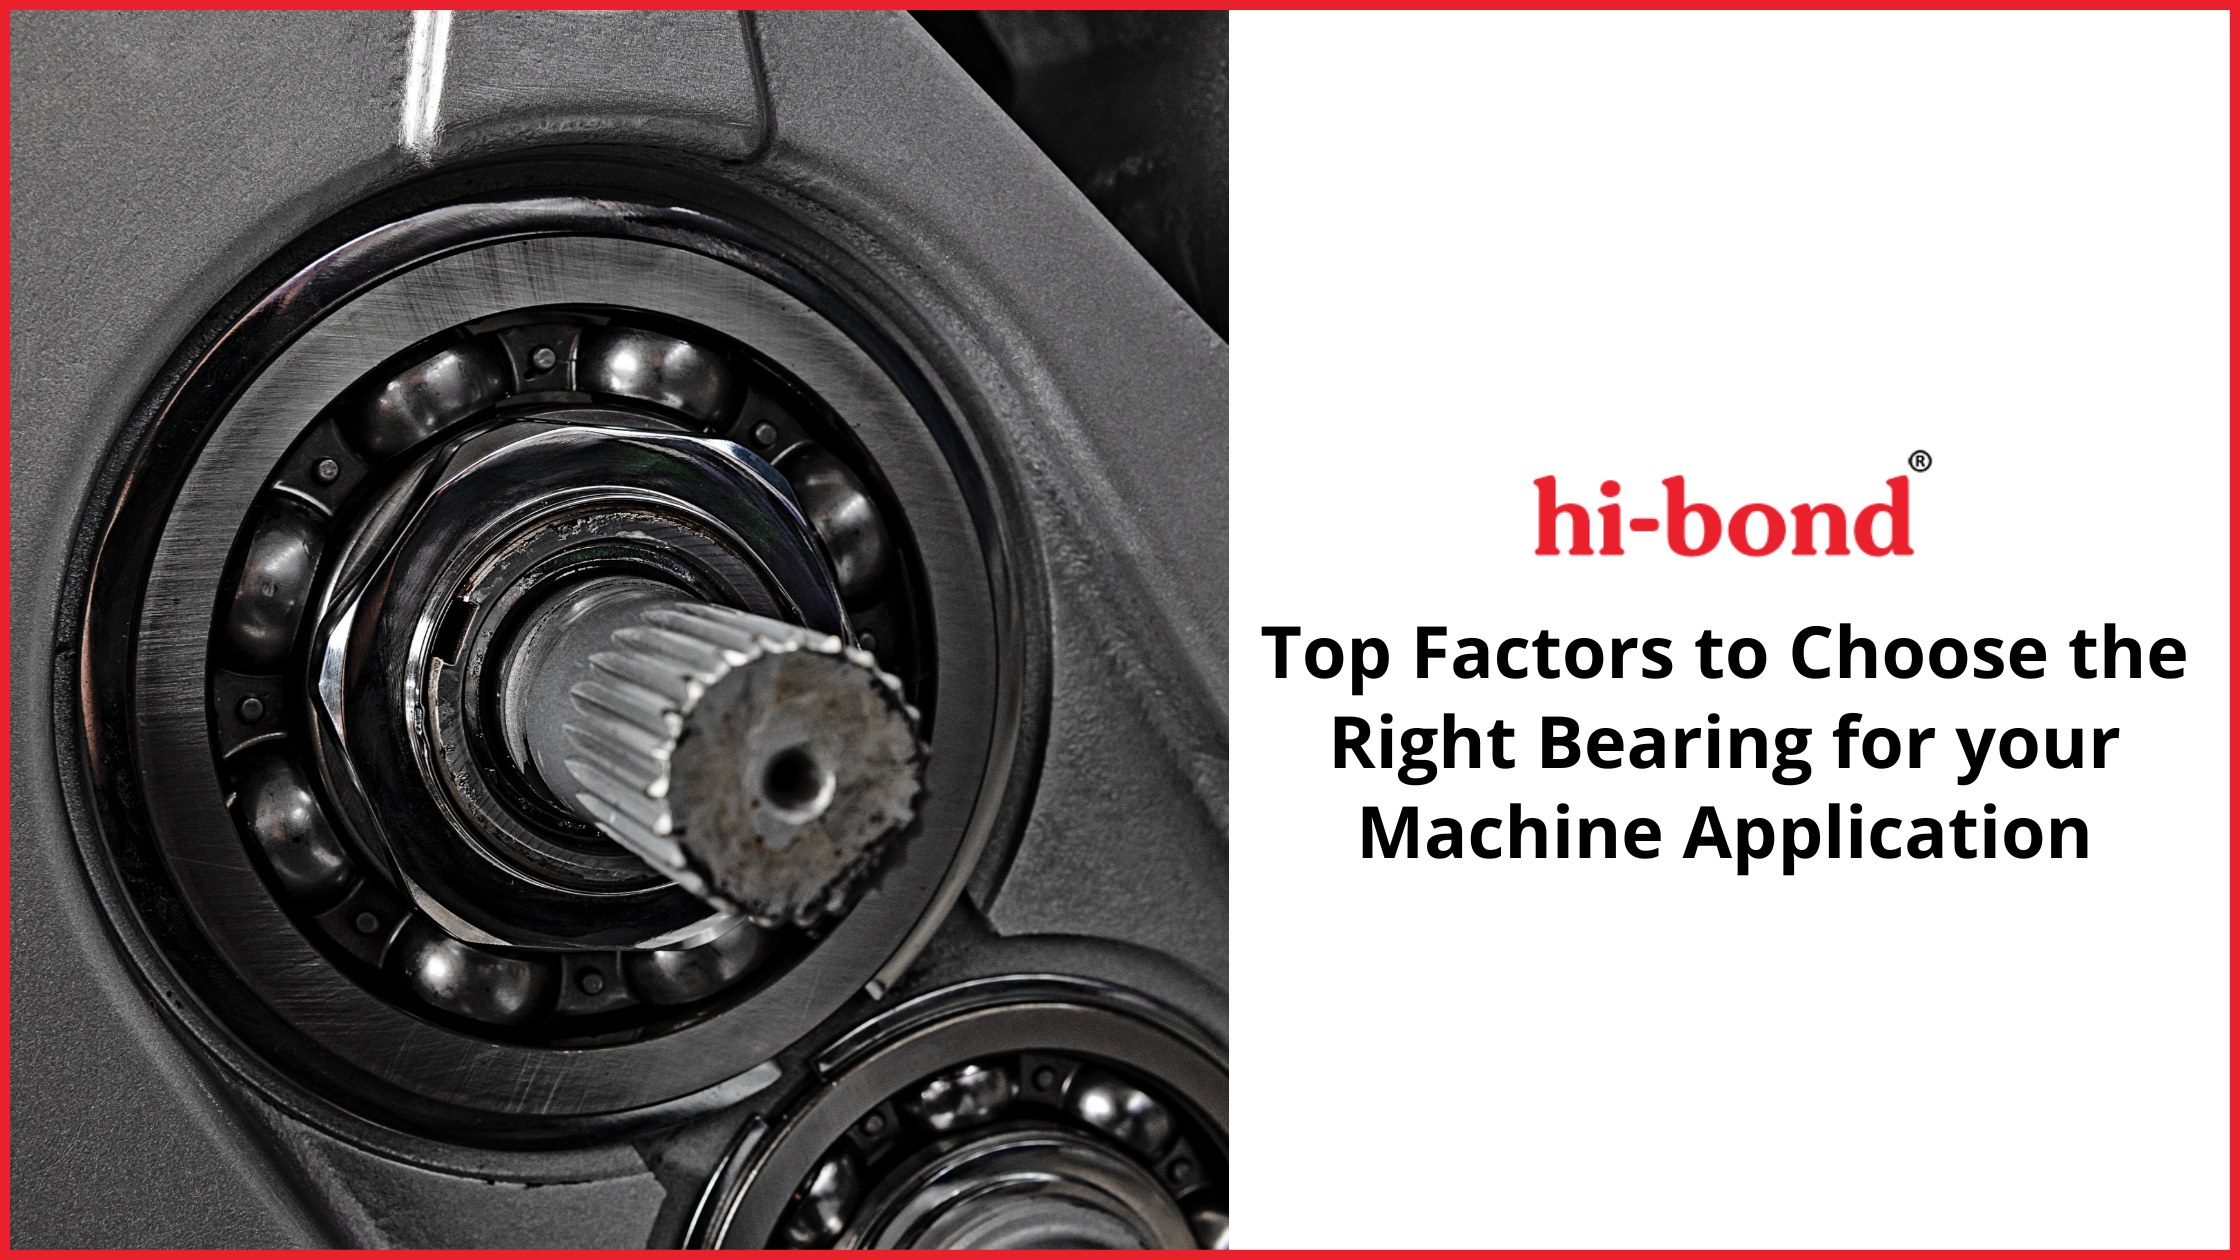 Top Factors to Choose the Right Bearing for your Machine Application (1)-c5f770b8